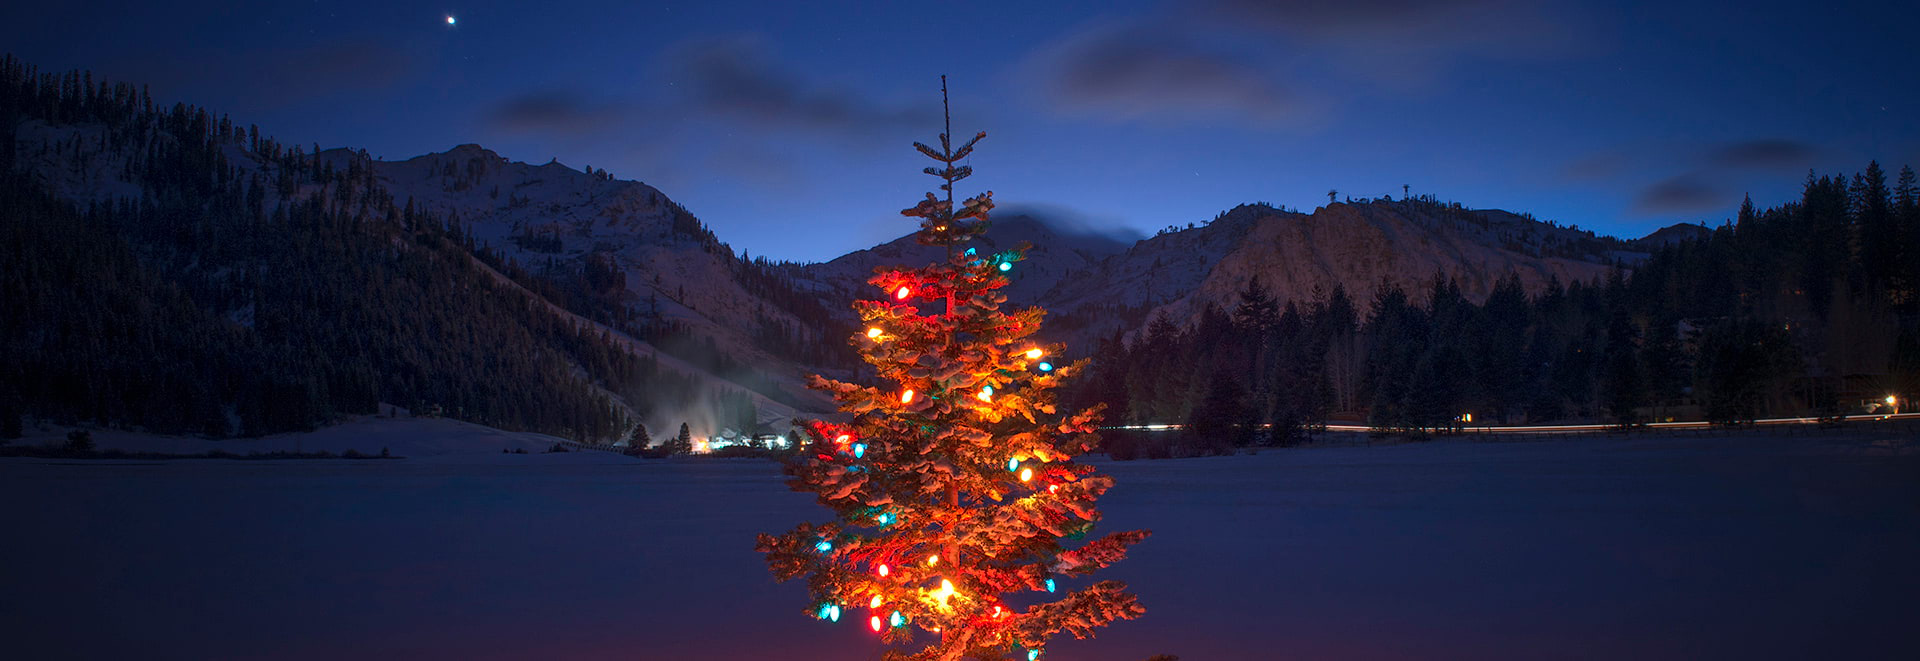 Christmas Tree lit up at night in Palisades Tahoe with mountains in the background